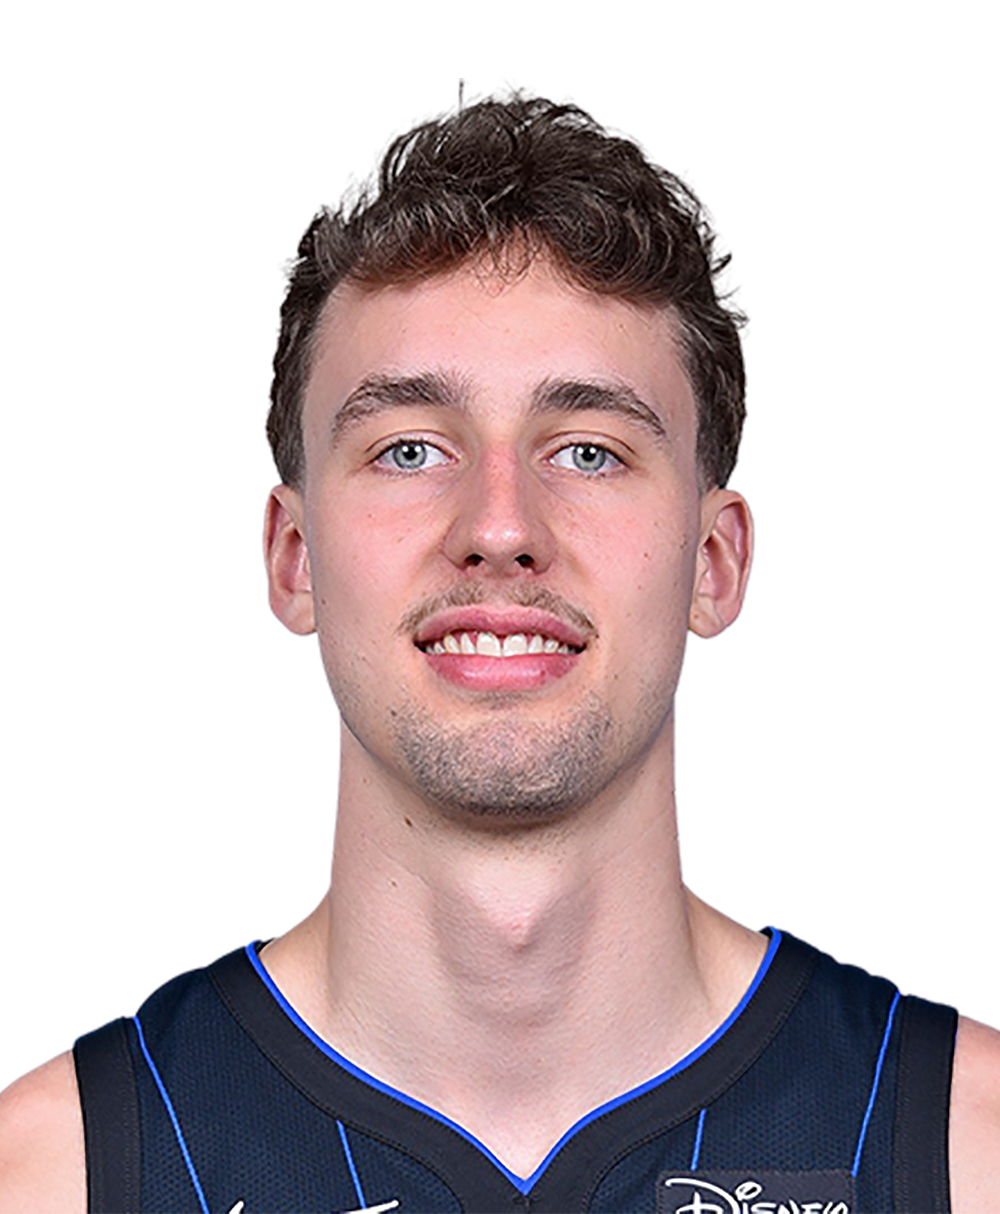 Magic: Franz Wagner cleared to play vs. Spurs